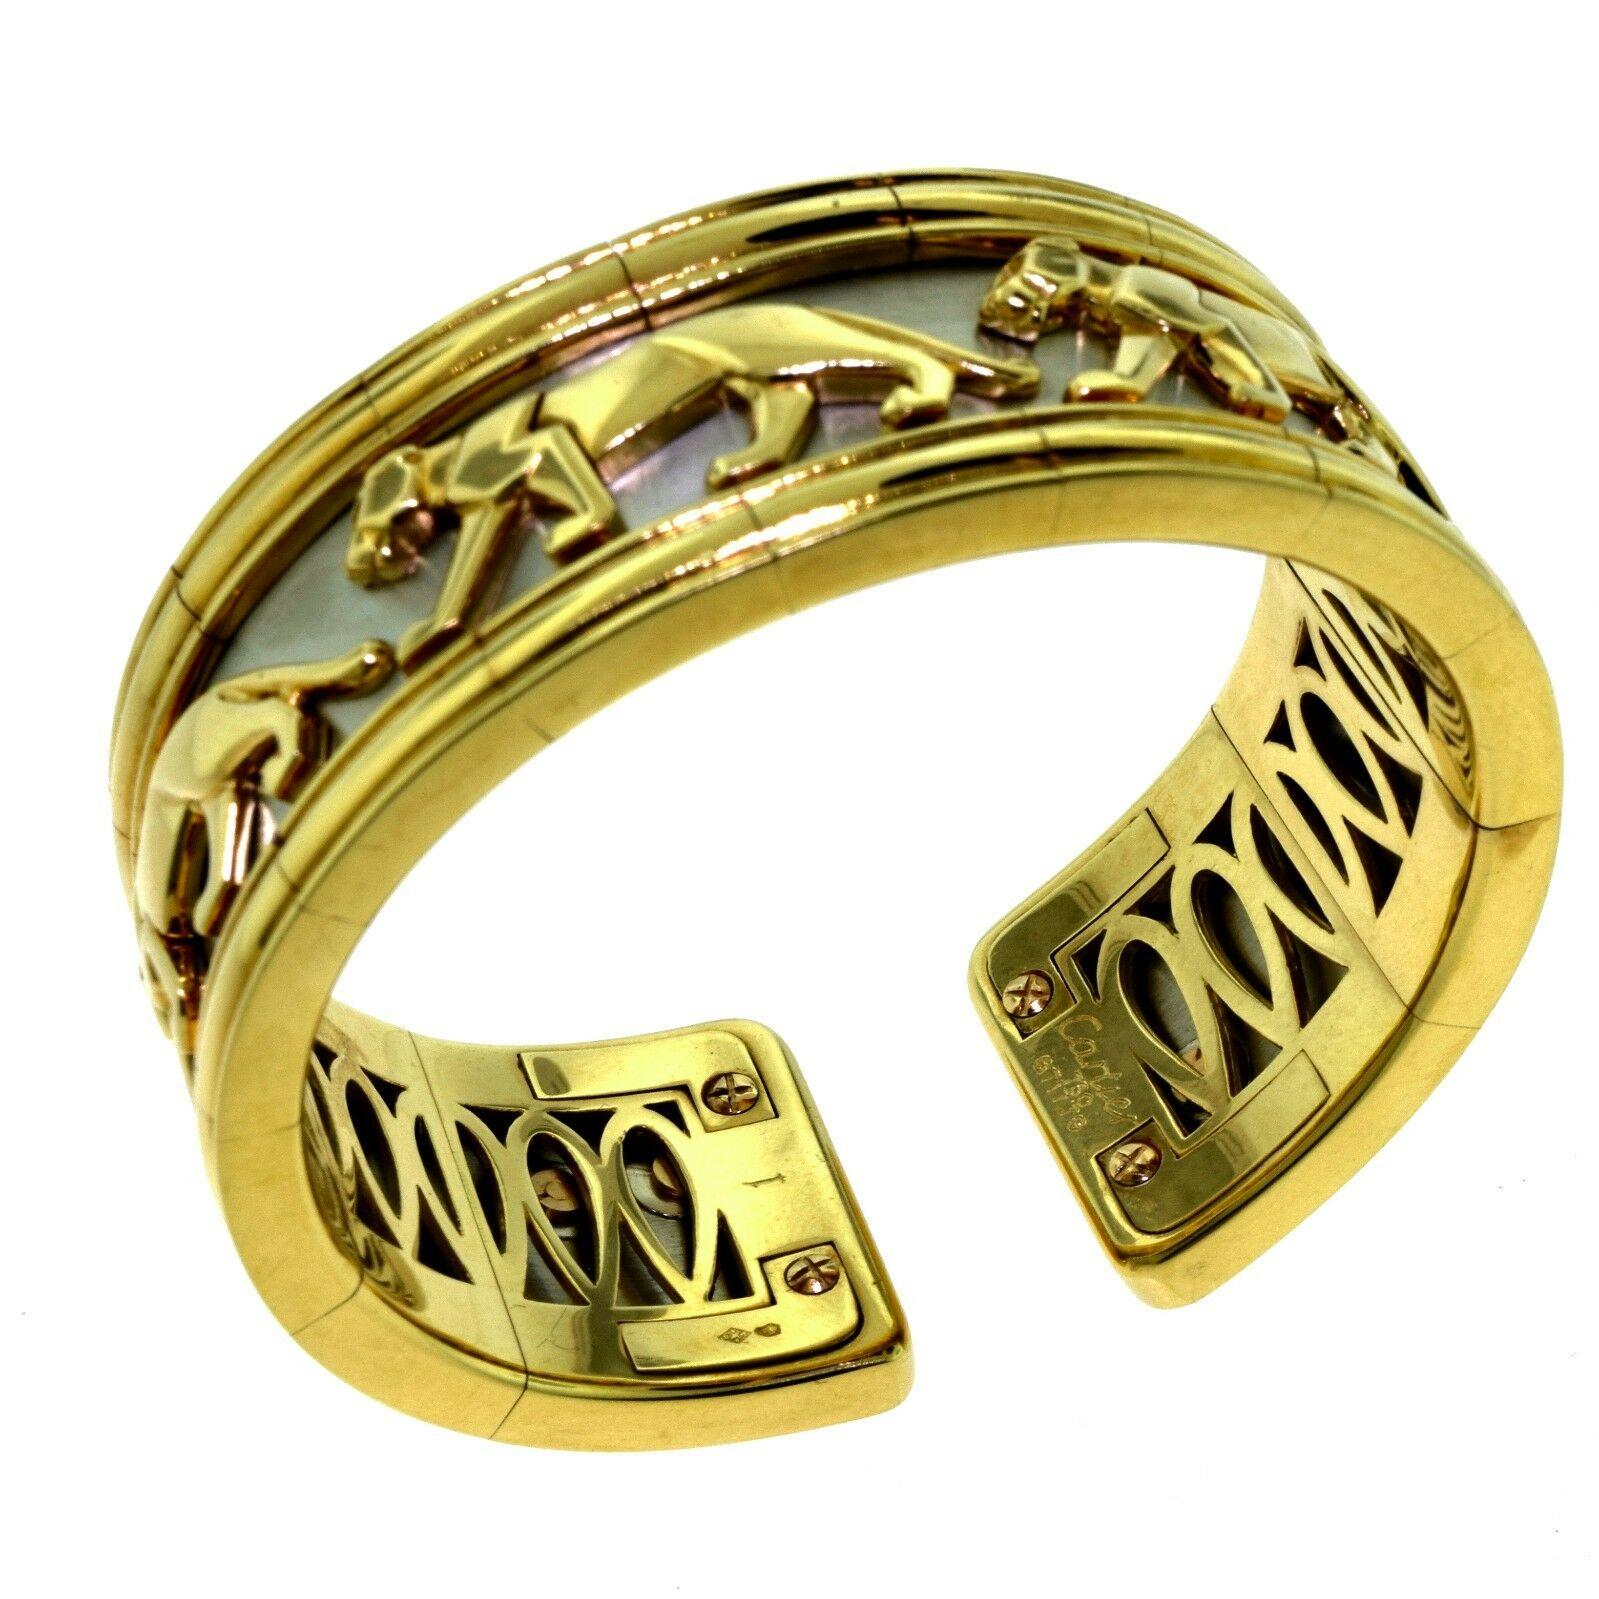 Designer: Cartier

Collection: Pharaon

Metal: Yellow Gold

White Gold

Metal Purity: 18k

Bracelet Size: Flexible. (Fits Small to Large wrist)

Cuff Width: 0.935 inches (23.72 mm)

Total Item Weight (g): 109.8

Hallmark: 1 Cartier Serial No. ​​​​​​​